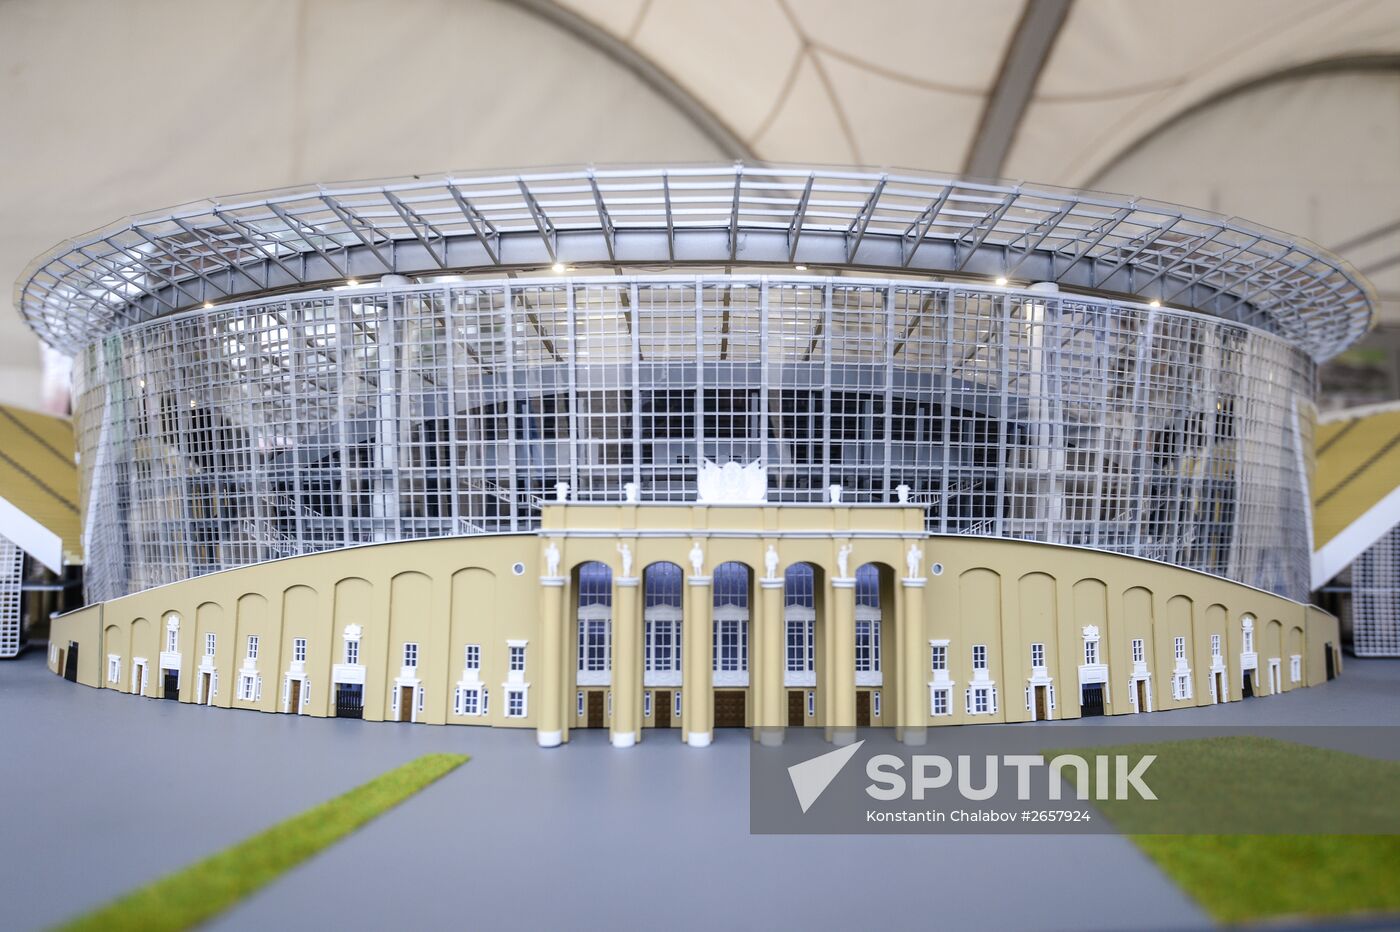 Redesigning Tsentralny (Central) Arena for 2018 World Cup